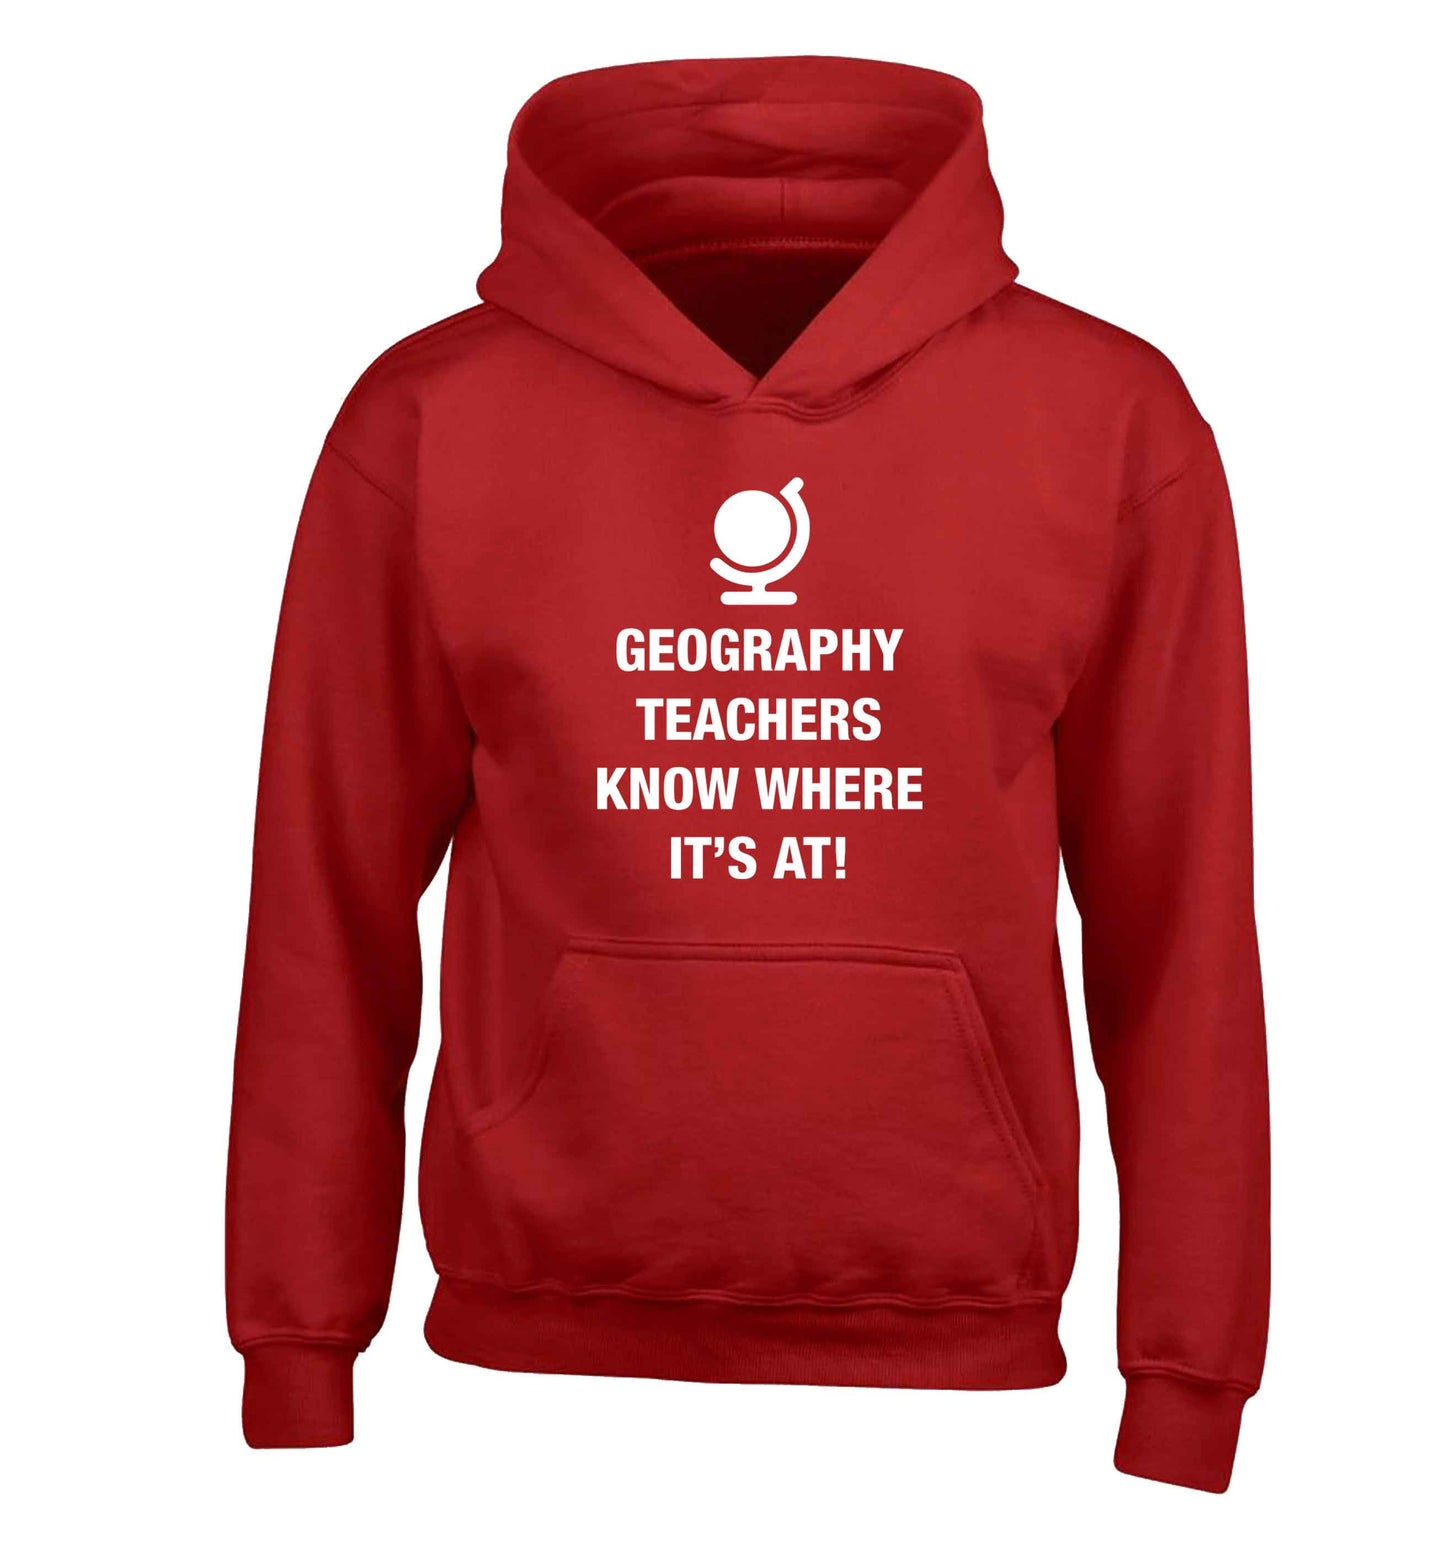 Geography teachers know where it's at children's red hoodie 12-13 Years